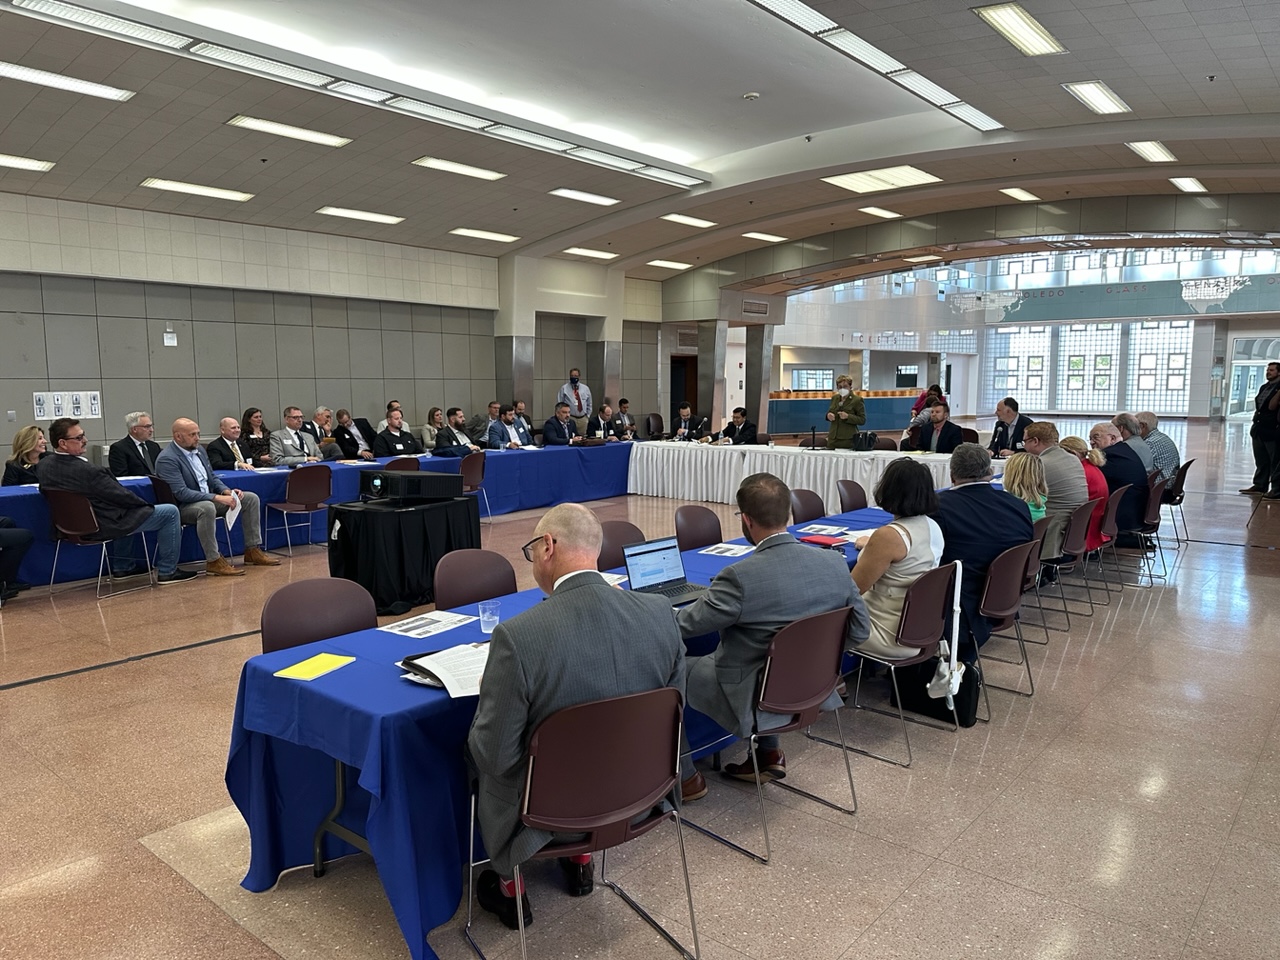 Nearly two dozen officials and organizational leaders attended a meeting in Toledo, OH, highlighted the need for leadership on multistate passenger-rail projects.